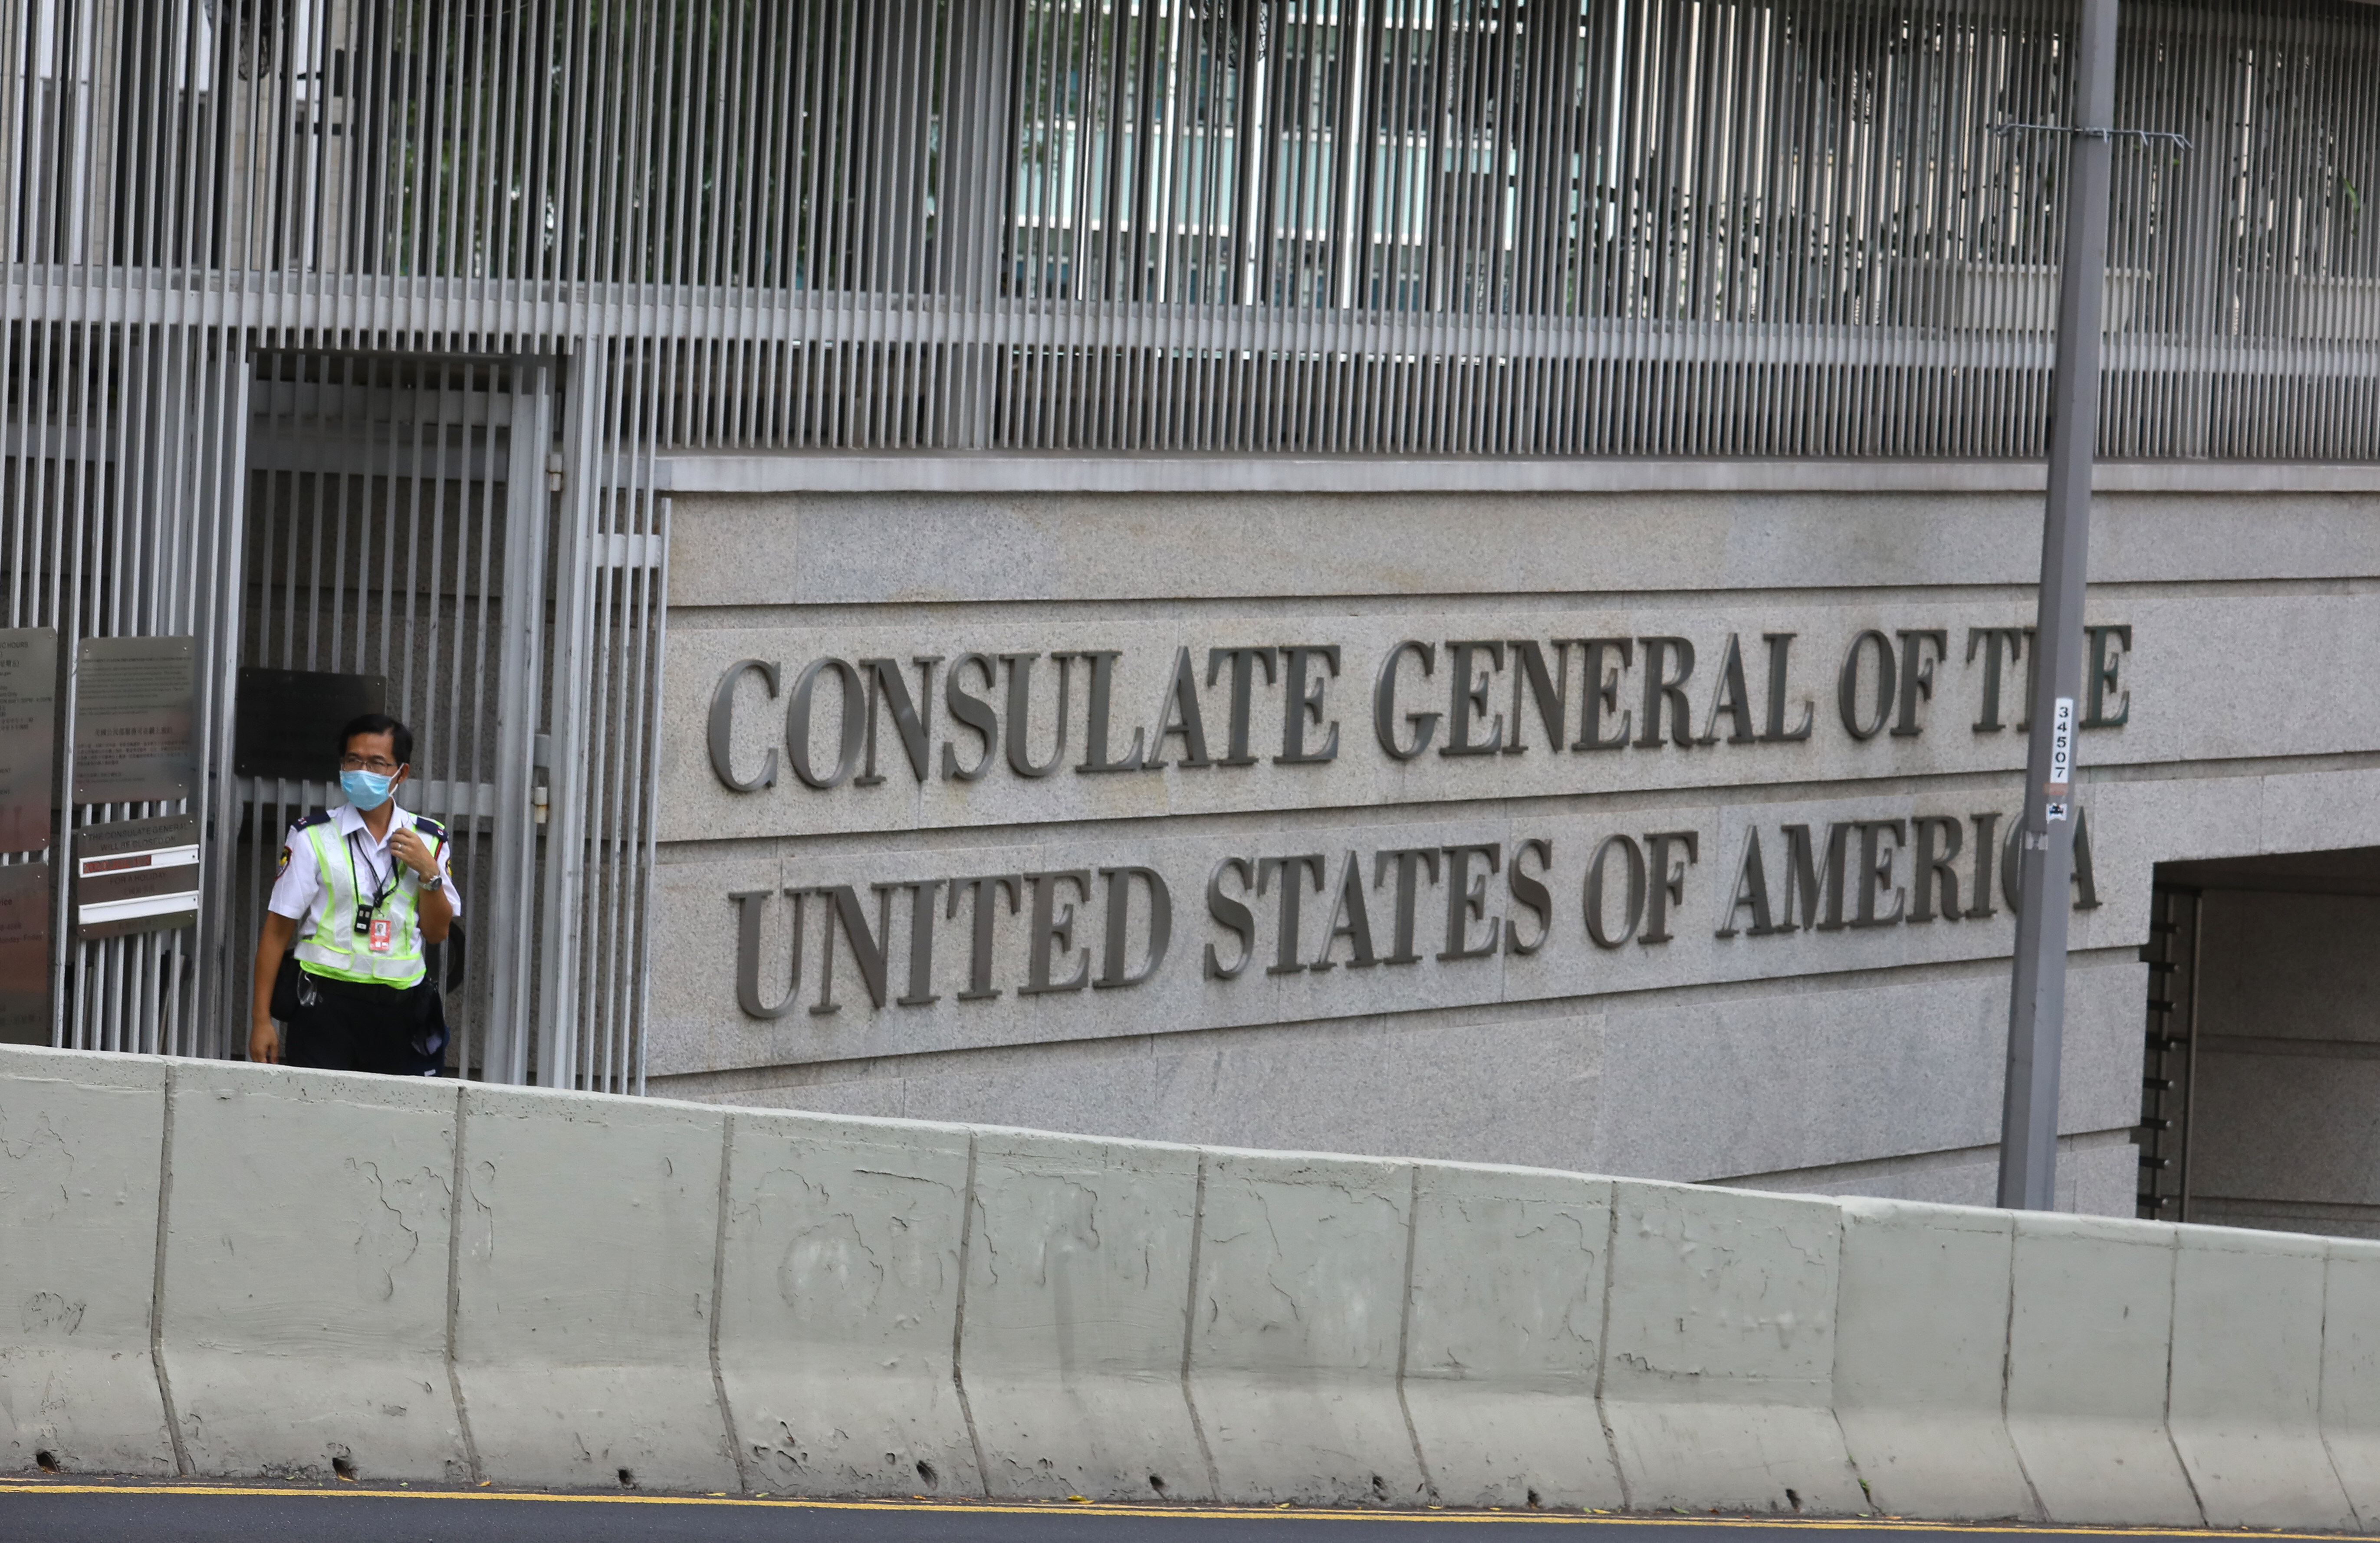 The US State Department on Friday defended its diplomats in Hong Kong after a local judge alluded to invitation from the consulate in her decision to deny a suspect bail. Photo: Dickson Lee